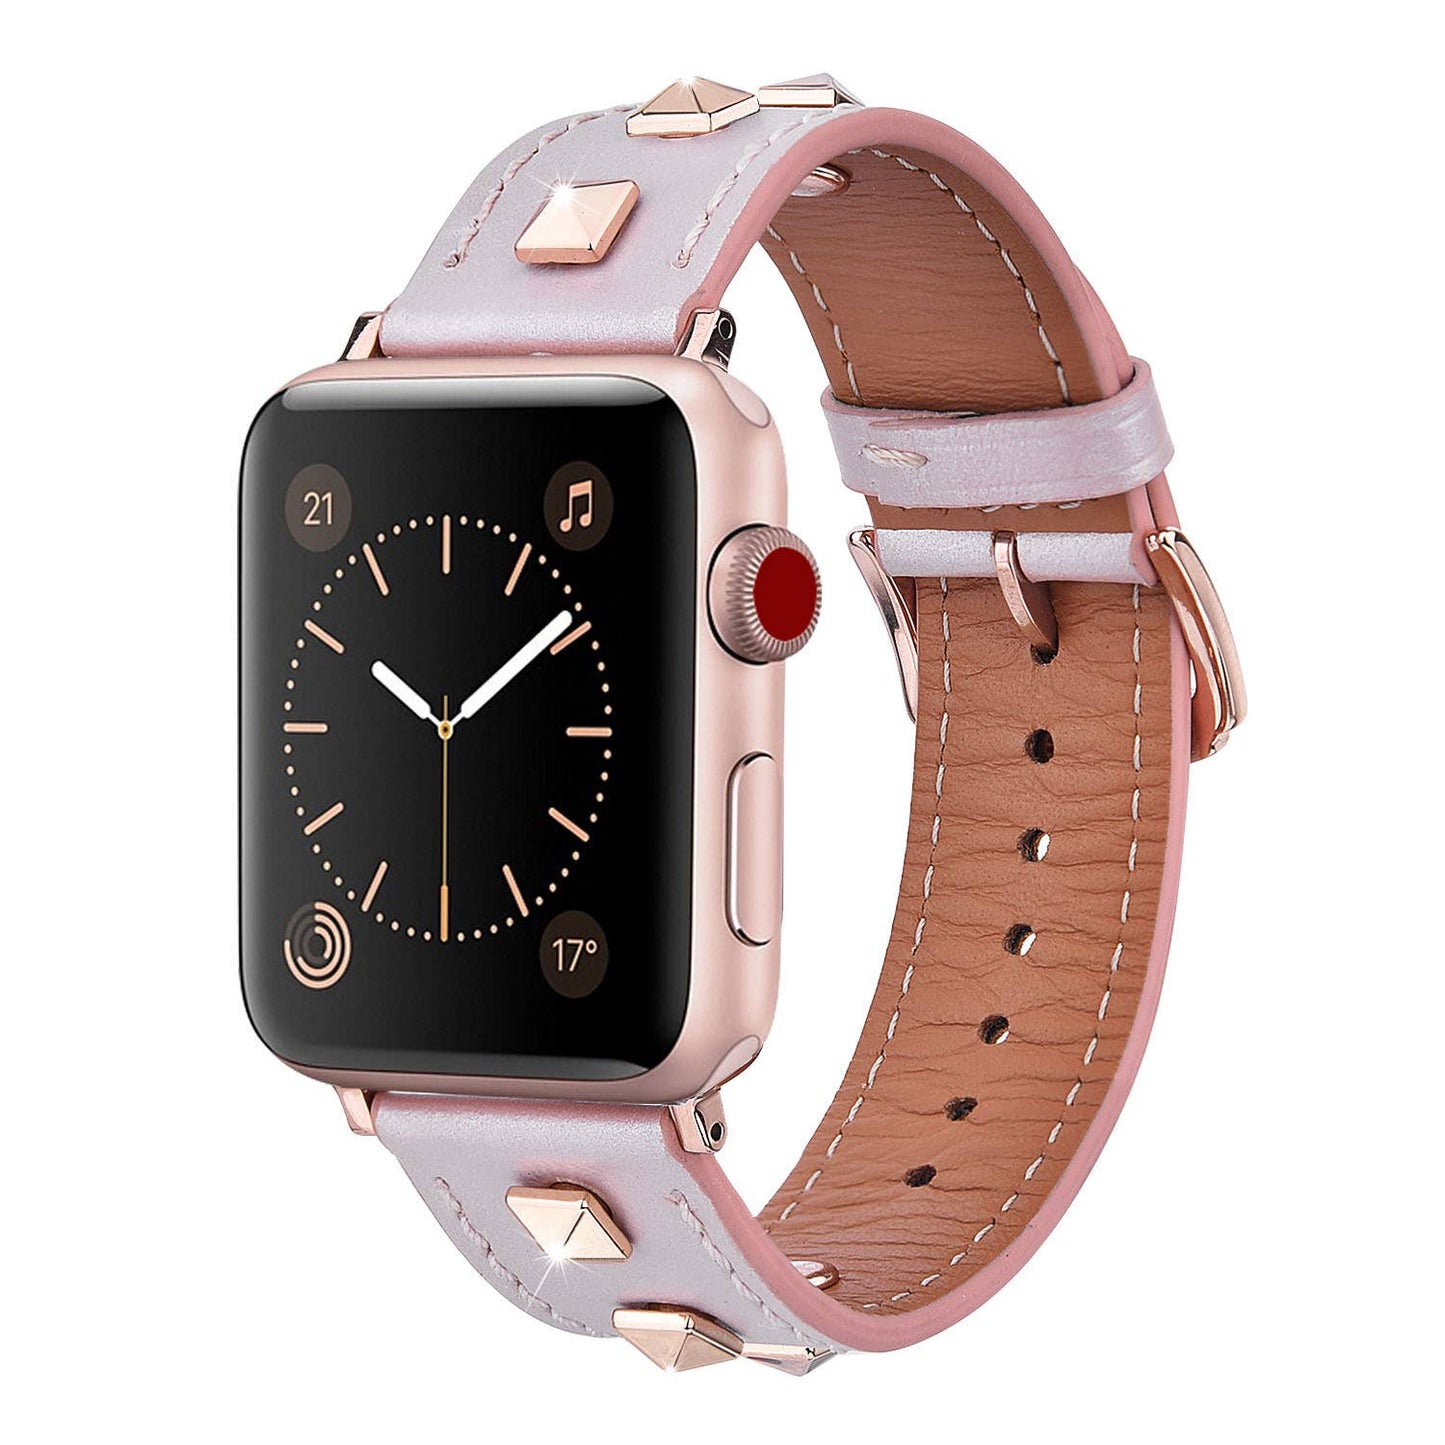 ShopTrendsNow - Leather Studded Apple Watch Band